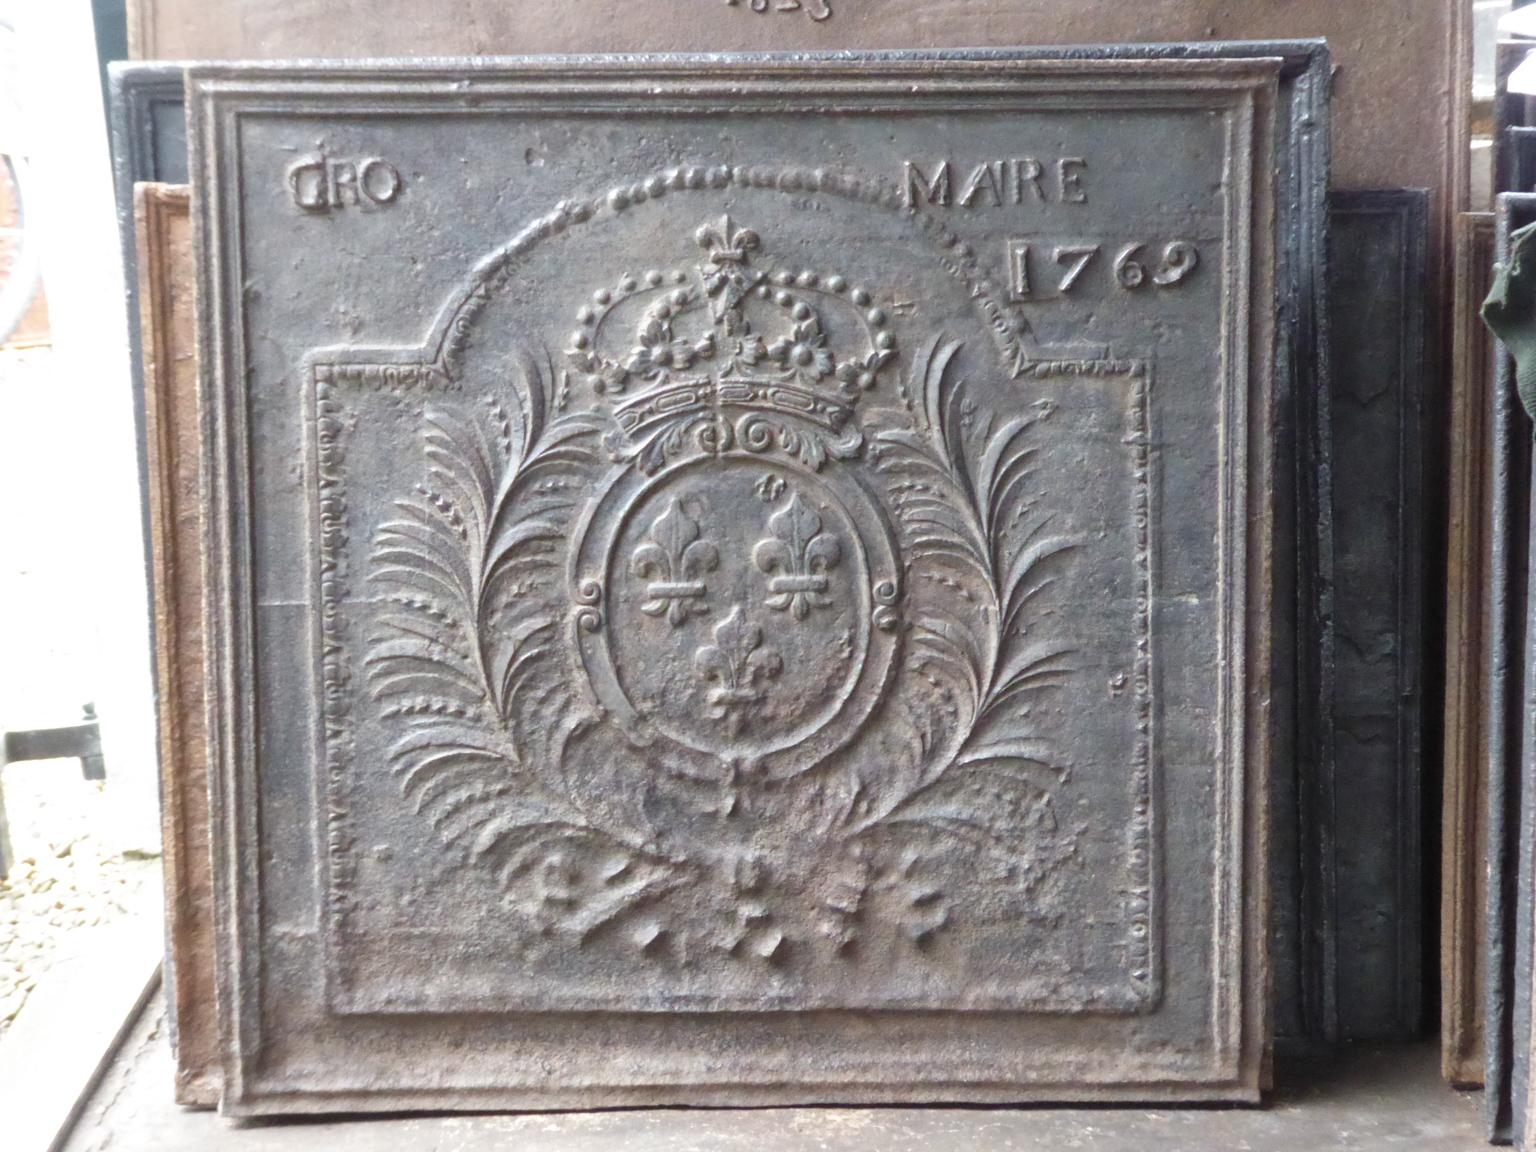 Large 18th century French Louis XV fireback with the arms of France. Coat of arms of the House of Bourbon, an originally French royal house that became a major dynasty in Europe. It delivered kings for Spain (Navarra), France, both Sicilies and